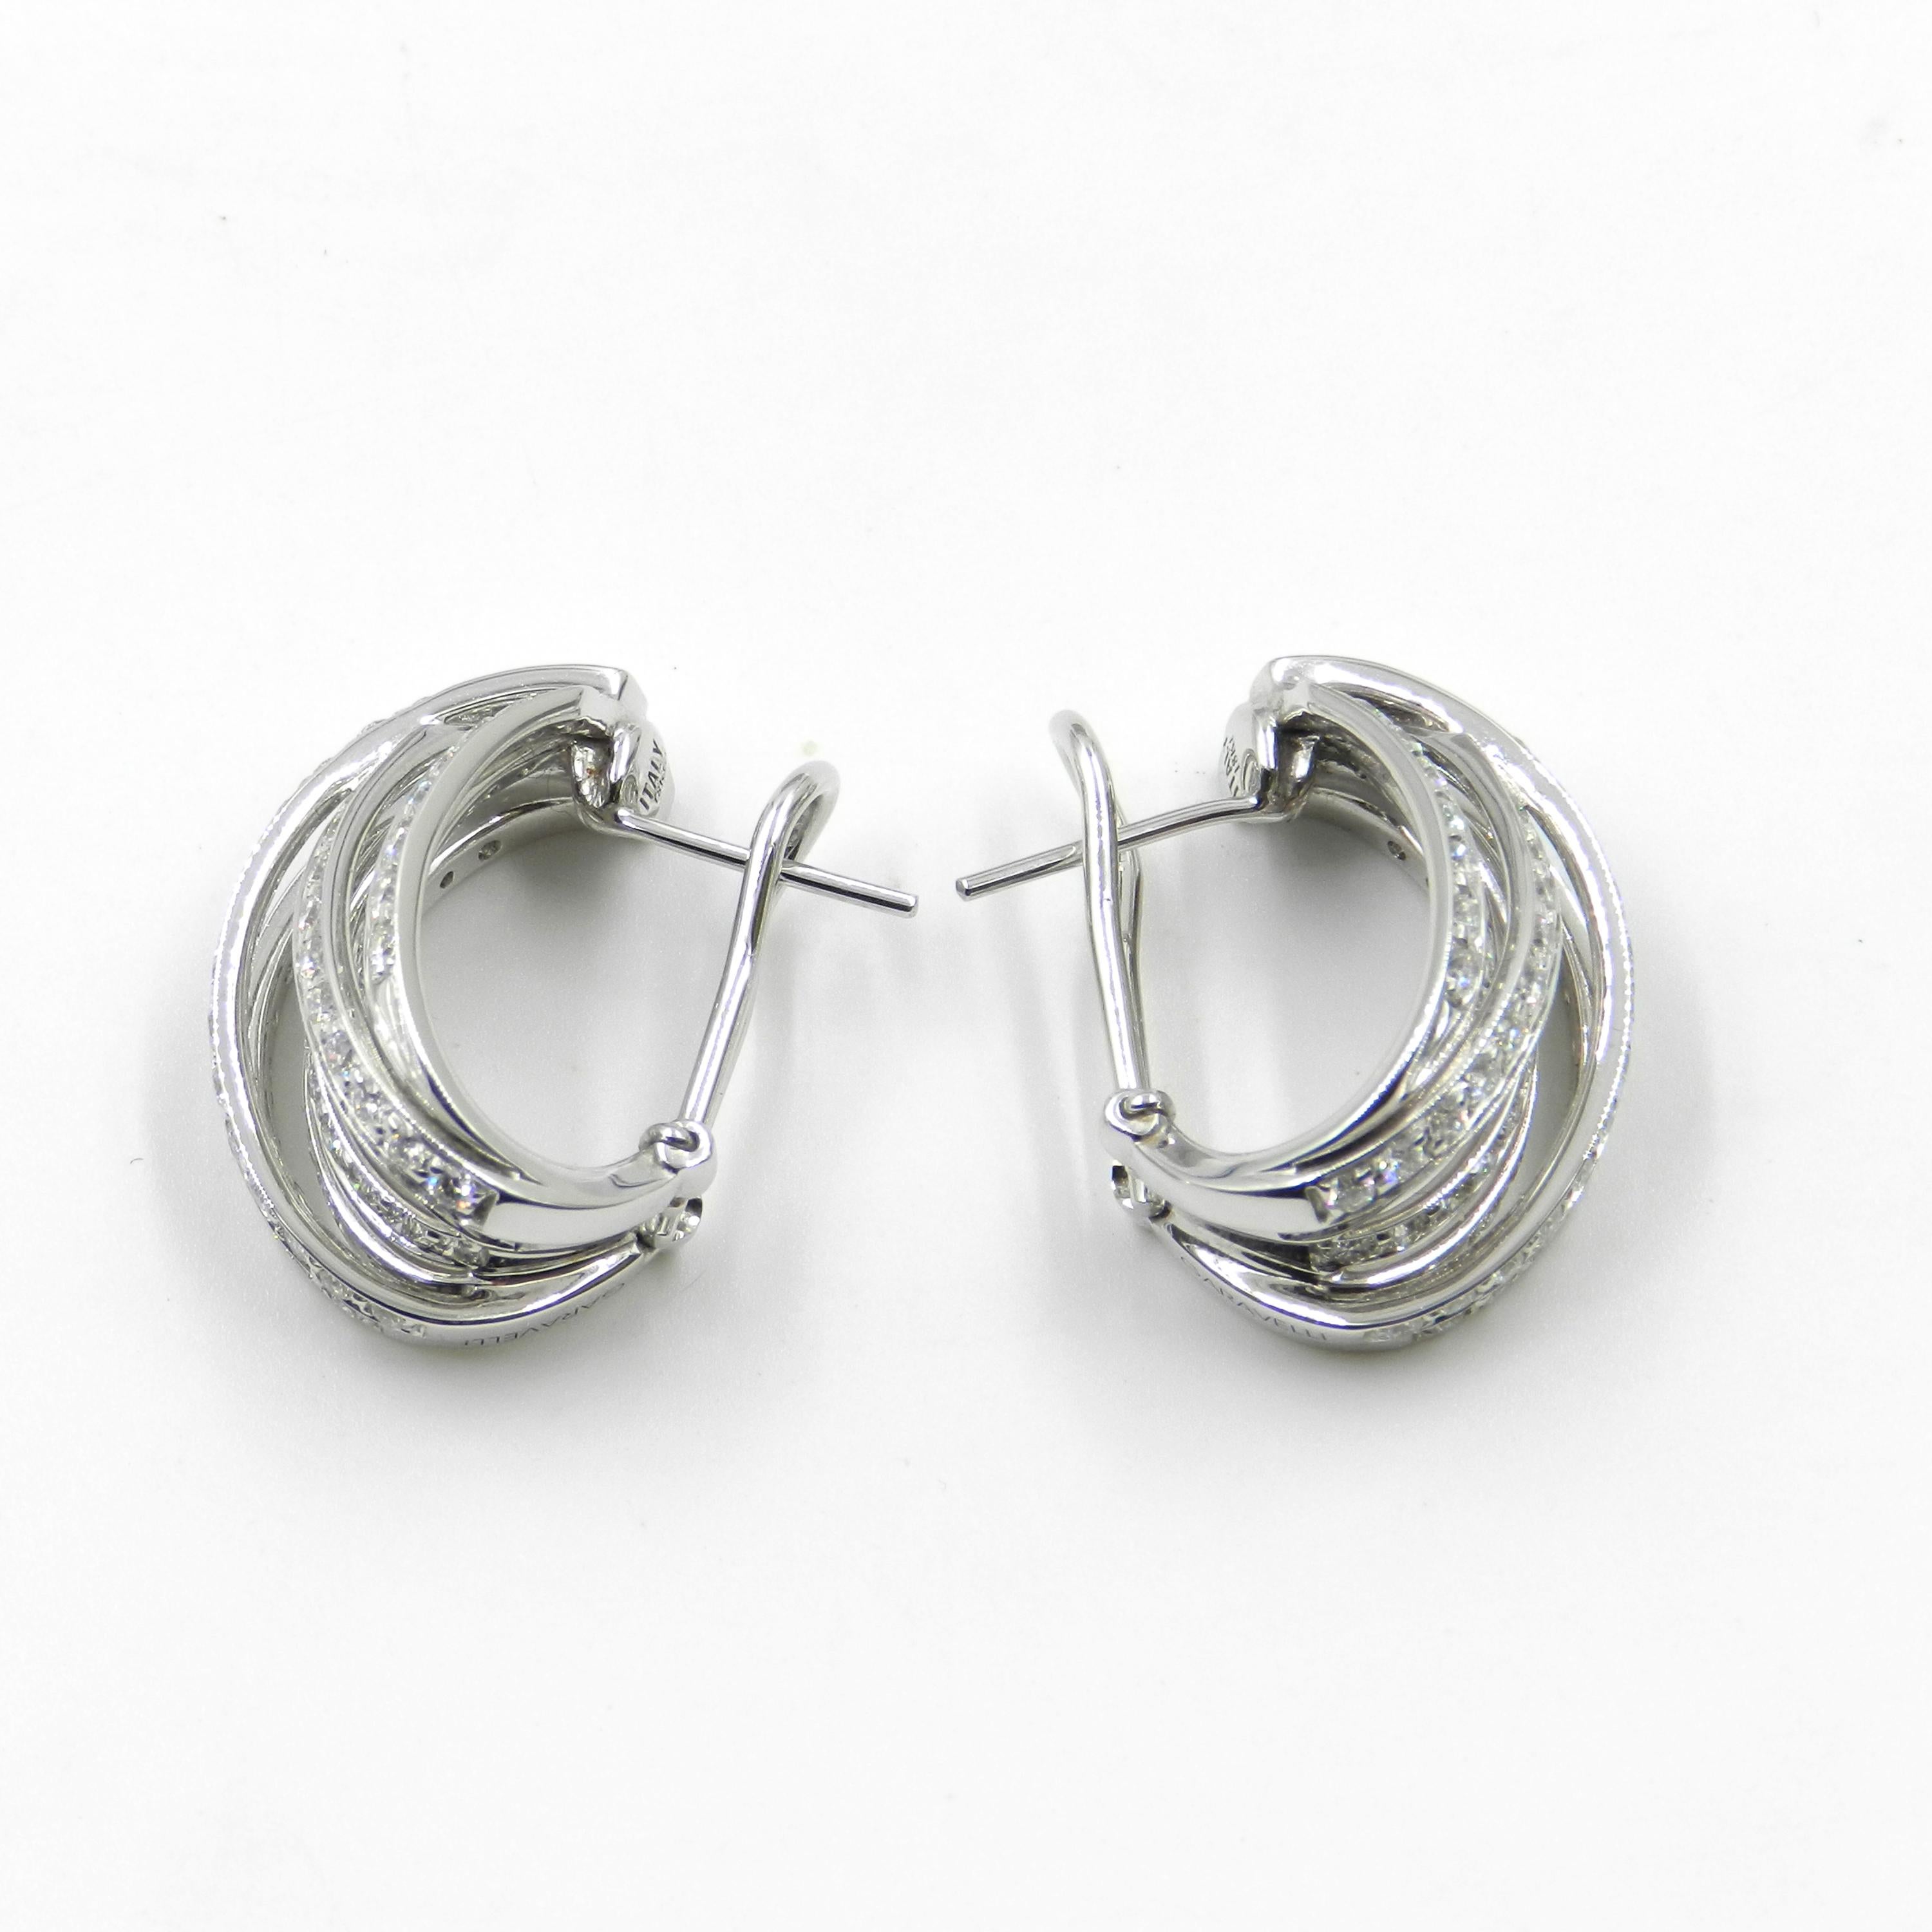 18KT White Gold White Diamonds GARAVELLI EARRINGS
Made In Italy
Matching ring also available.
18kt WHITE GOLD gr  : 18,10
WHITE DIAMONDS ct : 3,08